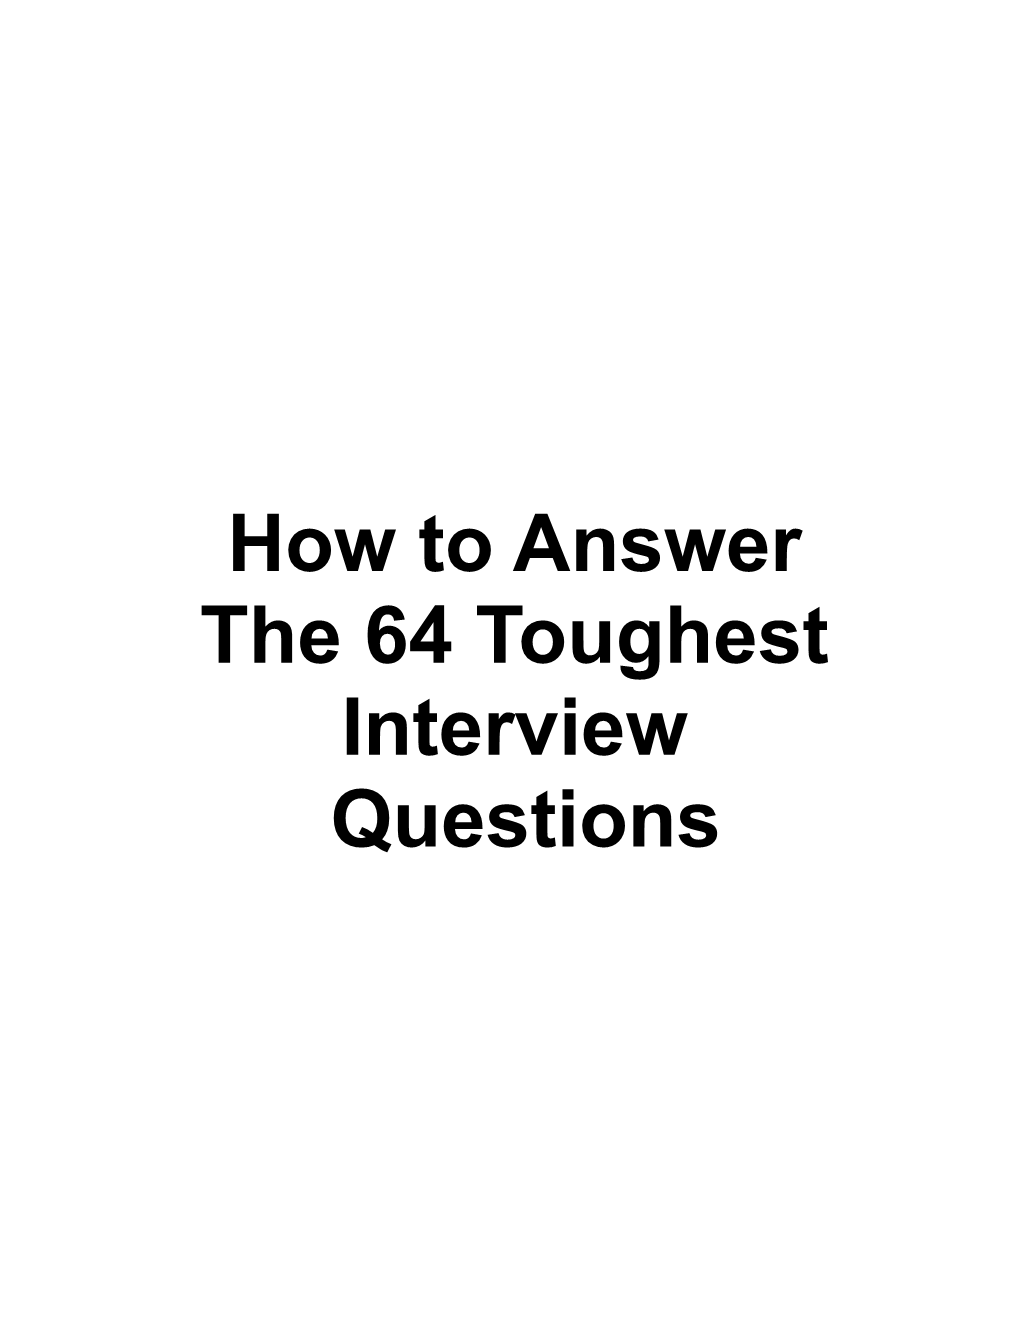 How to Answer the 64 Toughest Interview Questions